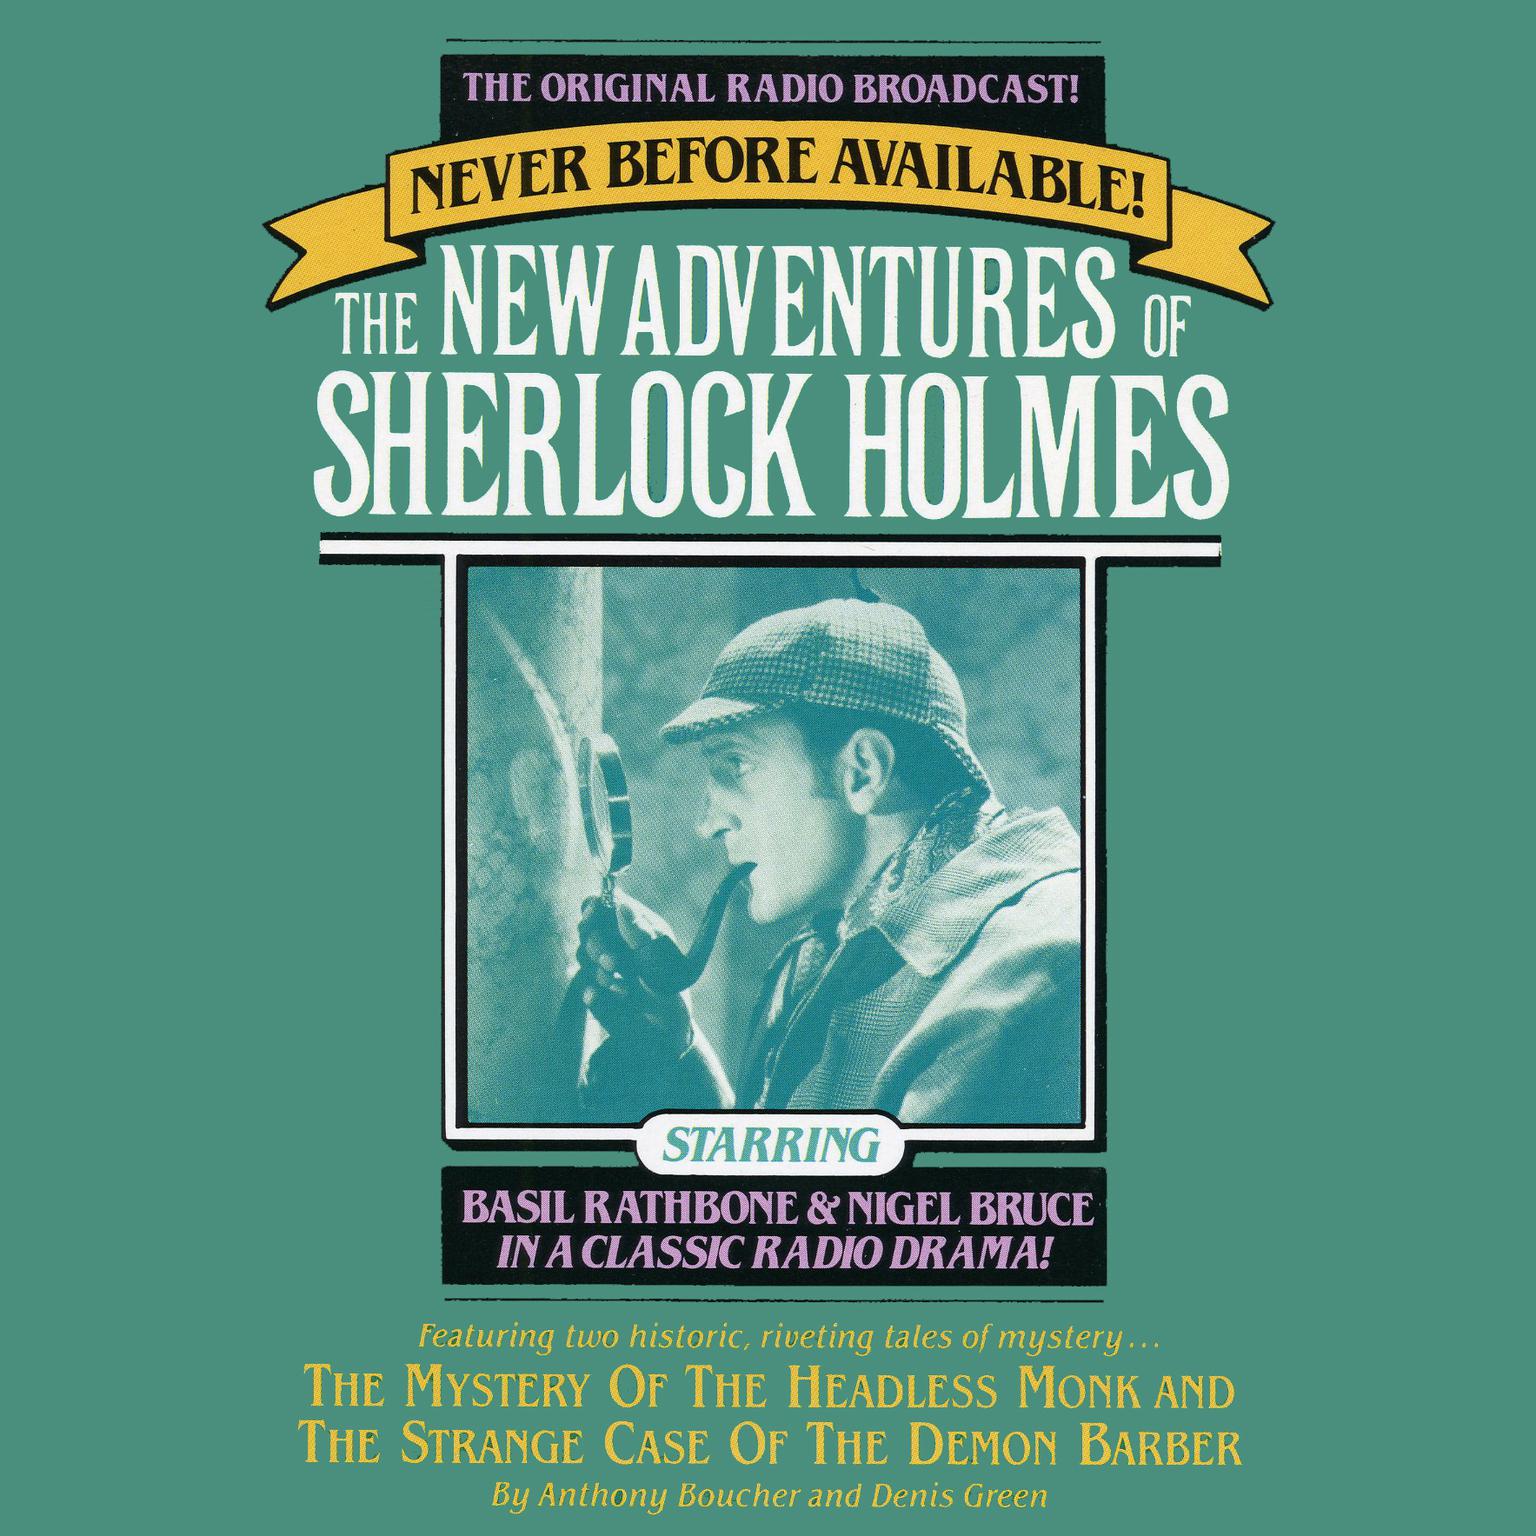 The Mystery of the Headless Monk and The Strange Case of the Demon Barber (Abridged): The New Adventures of Sherlock Holmes, Episode 4 Audiobook, by Anthony Boucher